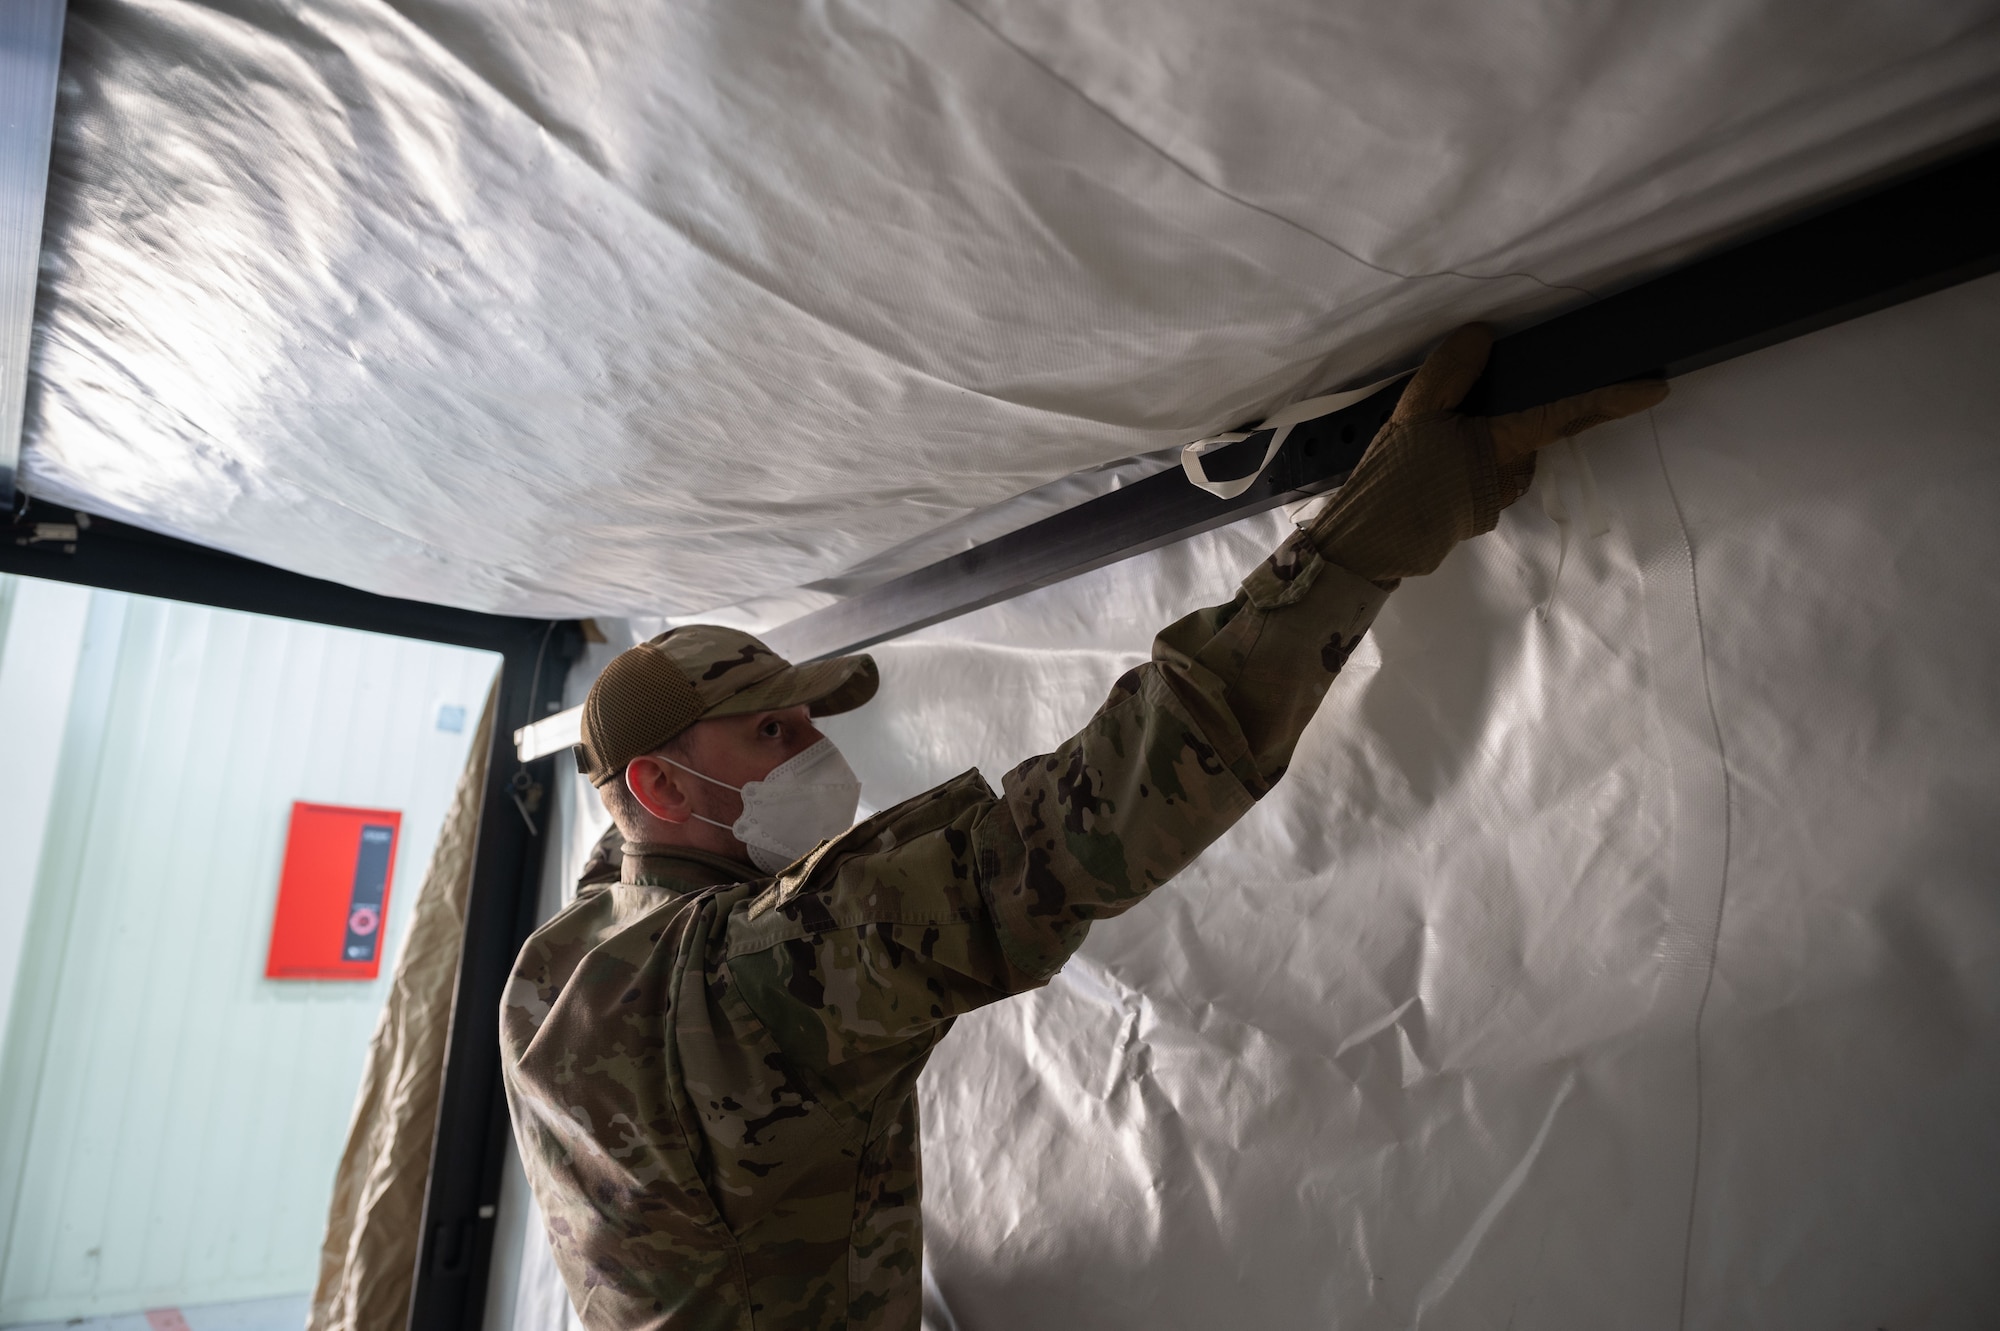 Senior Airman Brett Fetterman, 8th Healthcare Operations Squadron (HCOS) war reserve materiel technician, holds up a frame inside the multi-functional entrance of a chemical protection system (CPS) at Kunsan Air Base, Republic of Korea, Jan. 20, 2023. The 8th HCOS Airmen built and deconstructed the tent kit 2 CPS three times under the guidance of the Airmen from Eielson Air Force Base, Alaska. (U.S. Air Force photo by Senior Airman Akeem K. Campbell)